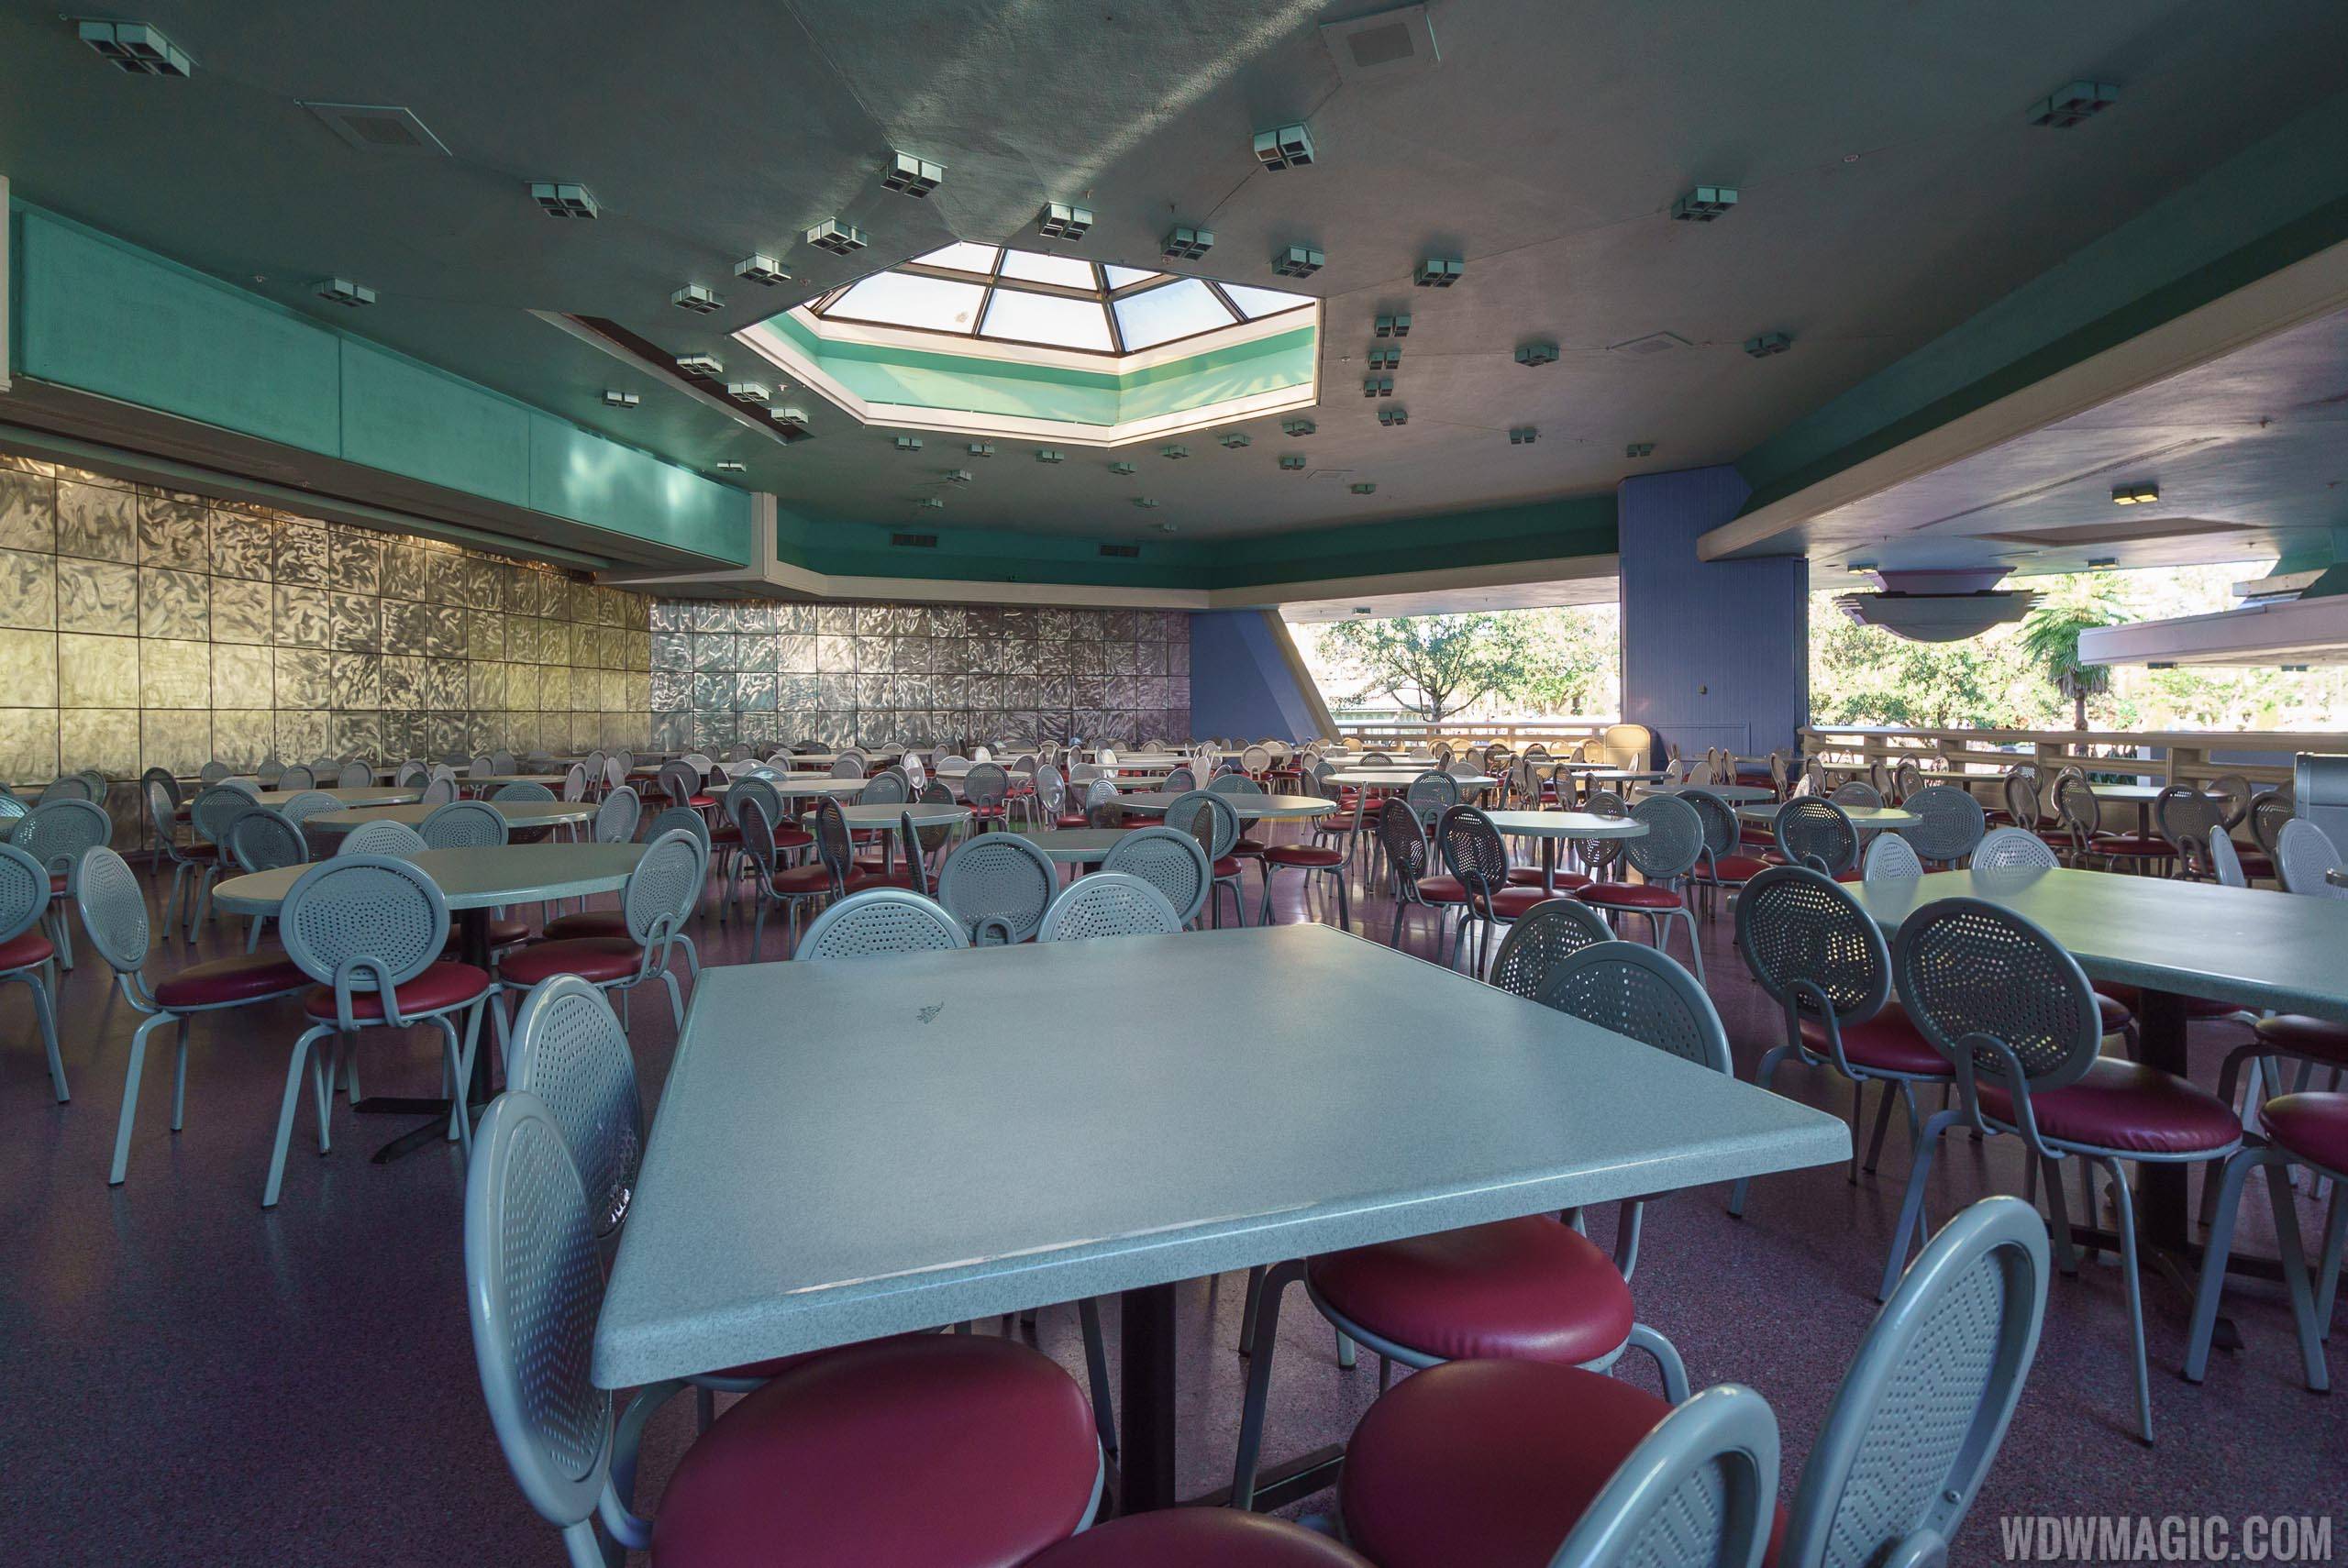 Tomorrowland Terrace to open for breakfast during Main Street Bakery Starbucks conversion